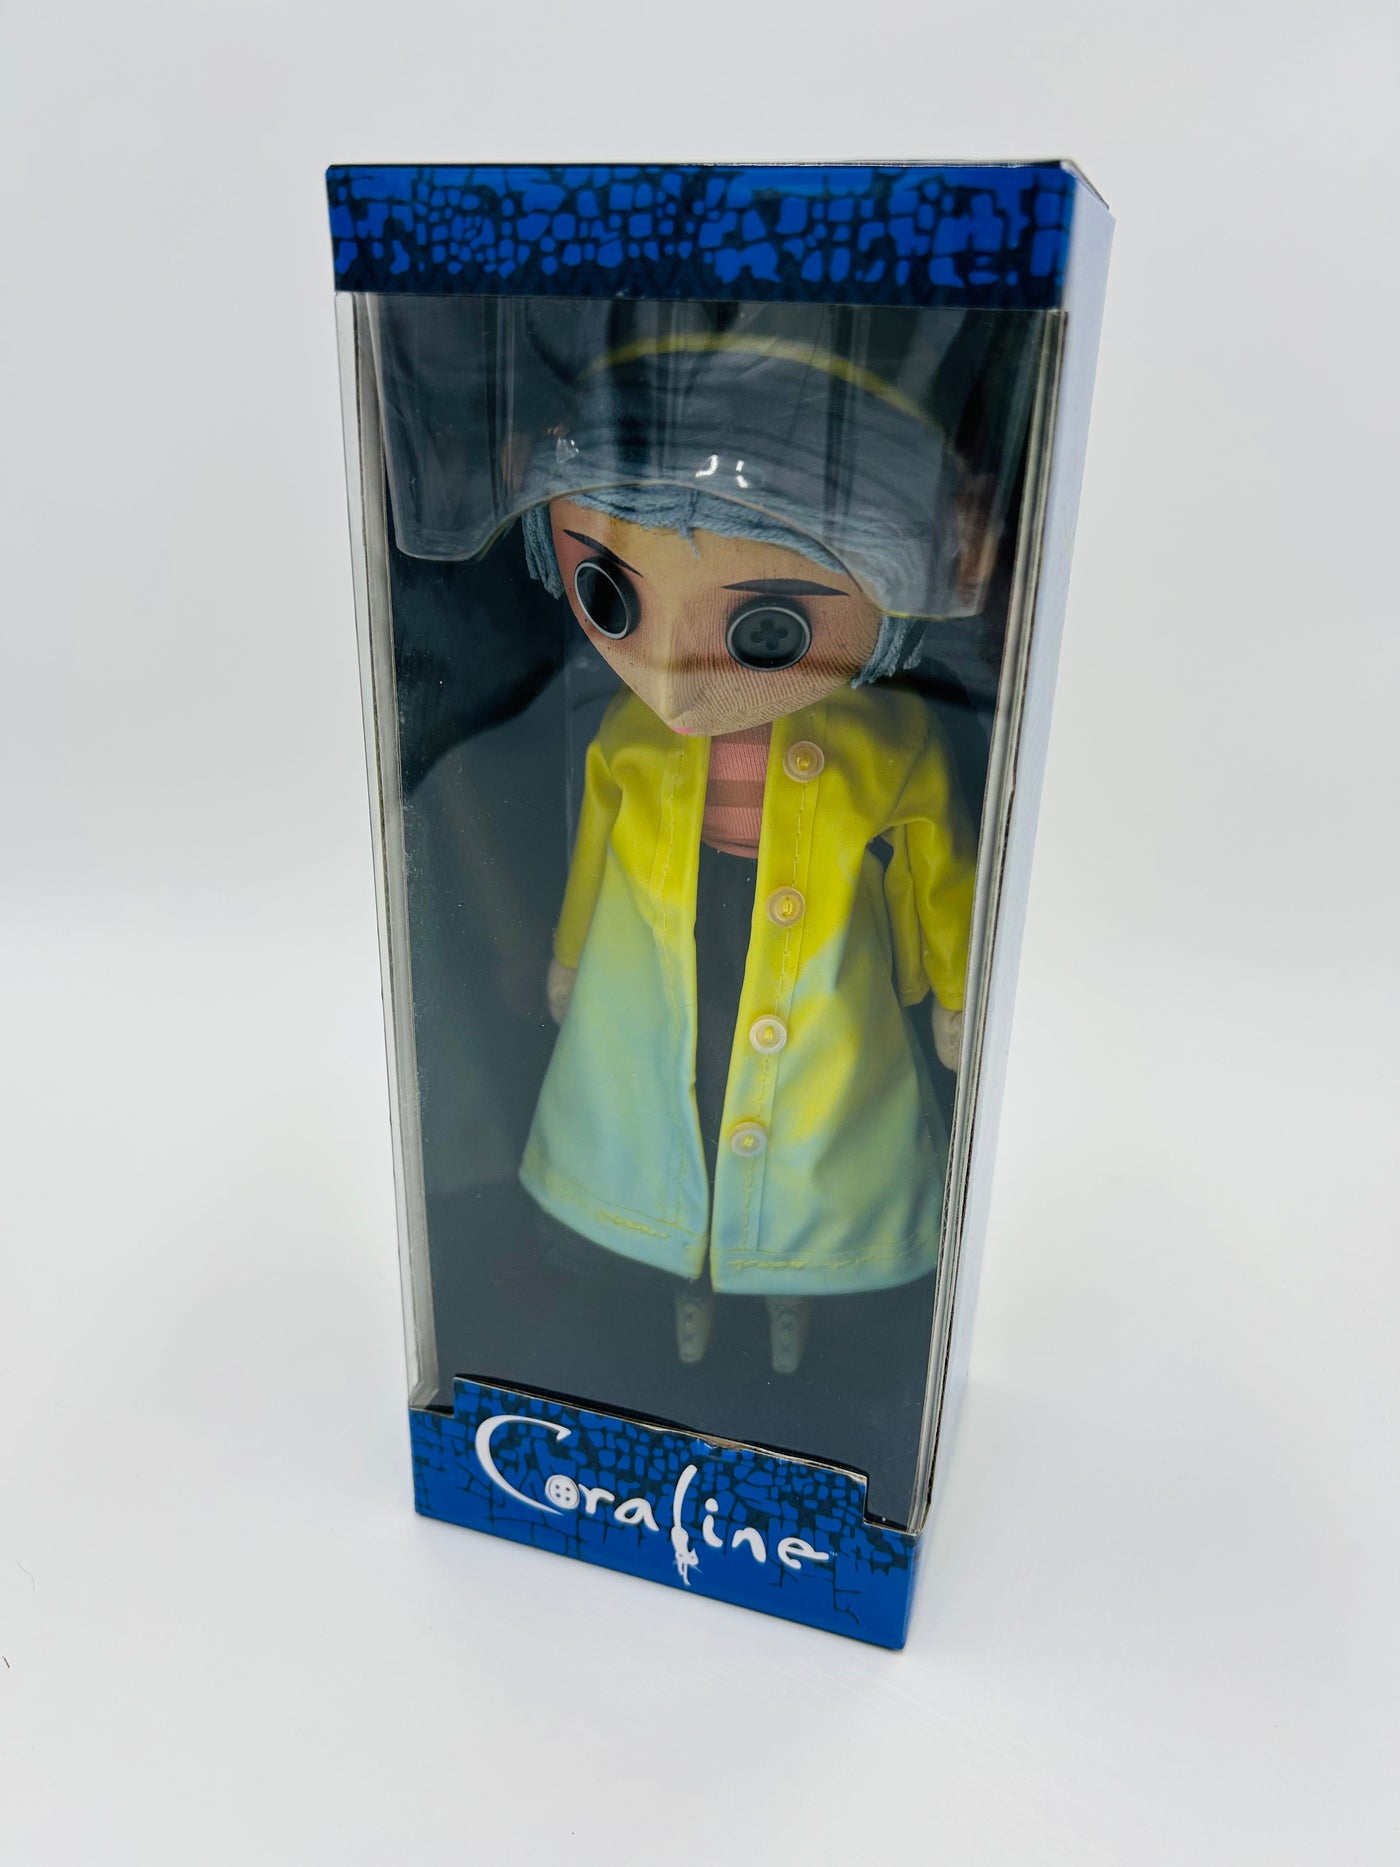 Coraline Doll - Limited Edition By Laika